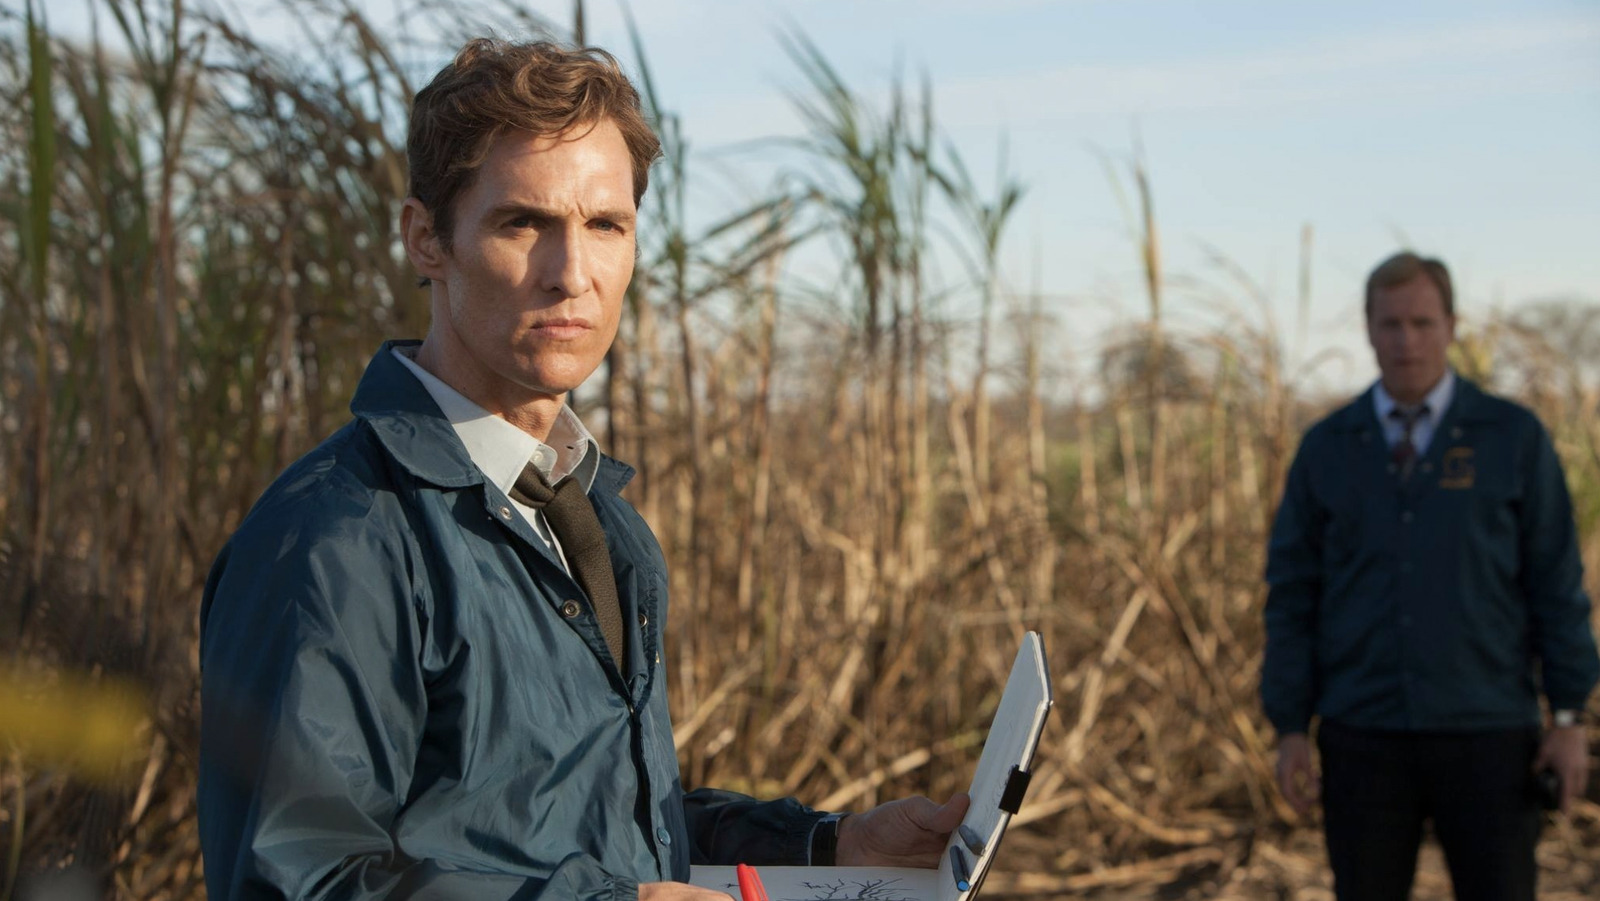 Directing True Detective was a behind-the-scenes "struggle" for Cary Fukunaga